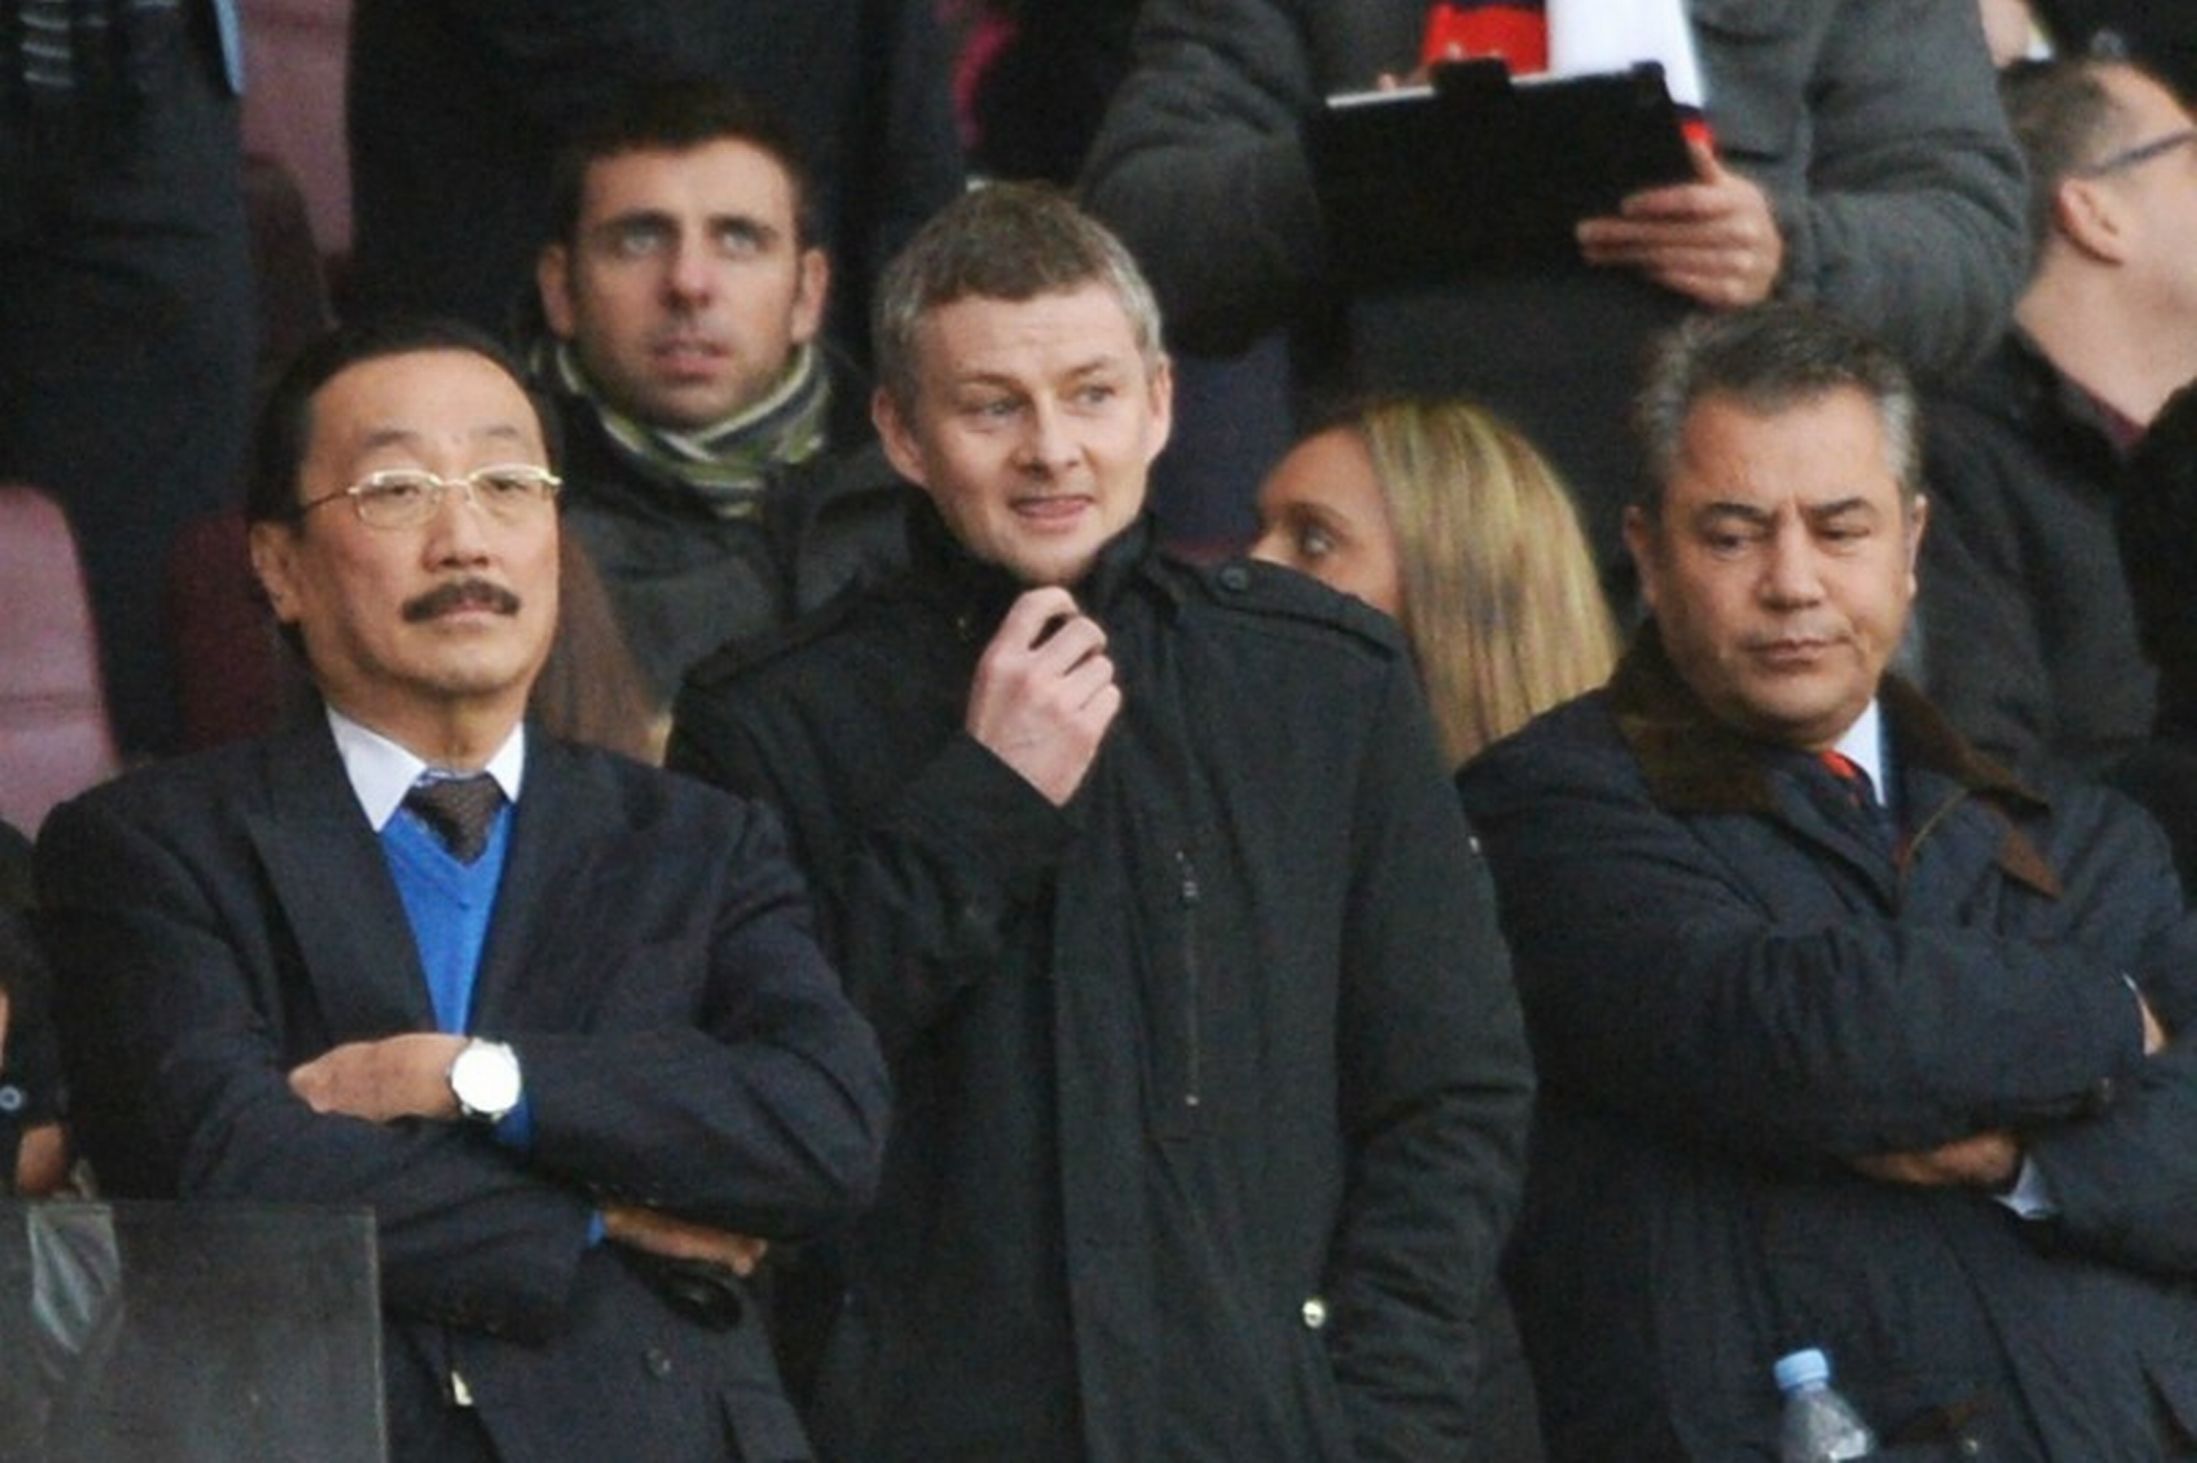 Prospective new manager Ole Gunnar Solskjaer with Vincent Tan and Mehmet Dalman at yesterday's match. The colour of Mr Tan's jumper attracted much comment amid rumours that Solskjaer had made a return to blue a condition of him agreeing to the job - can't see it being true myself, but you can but hope!  